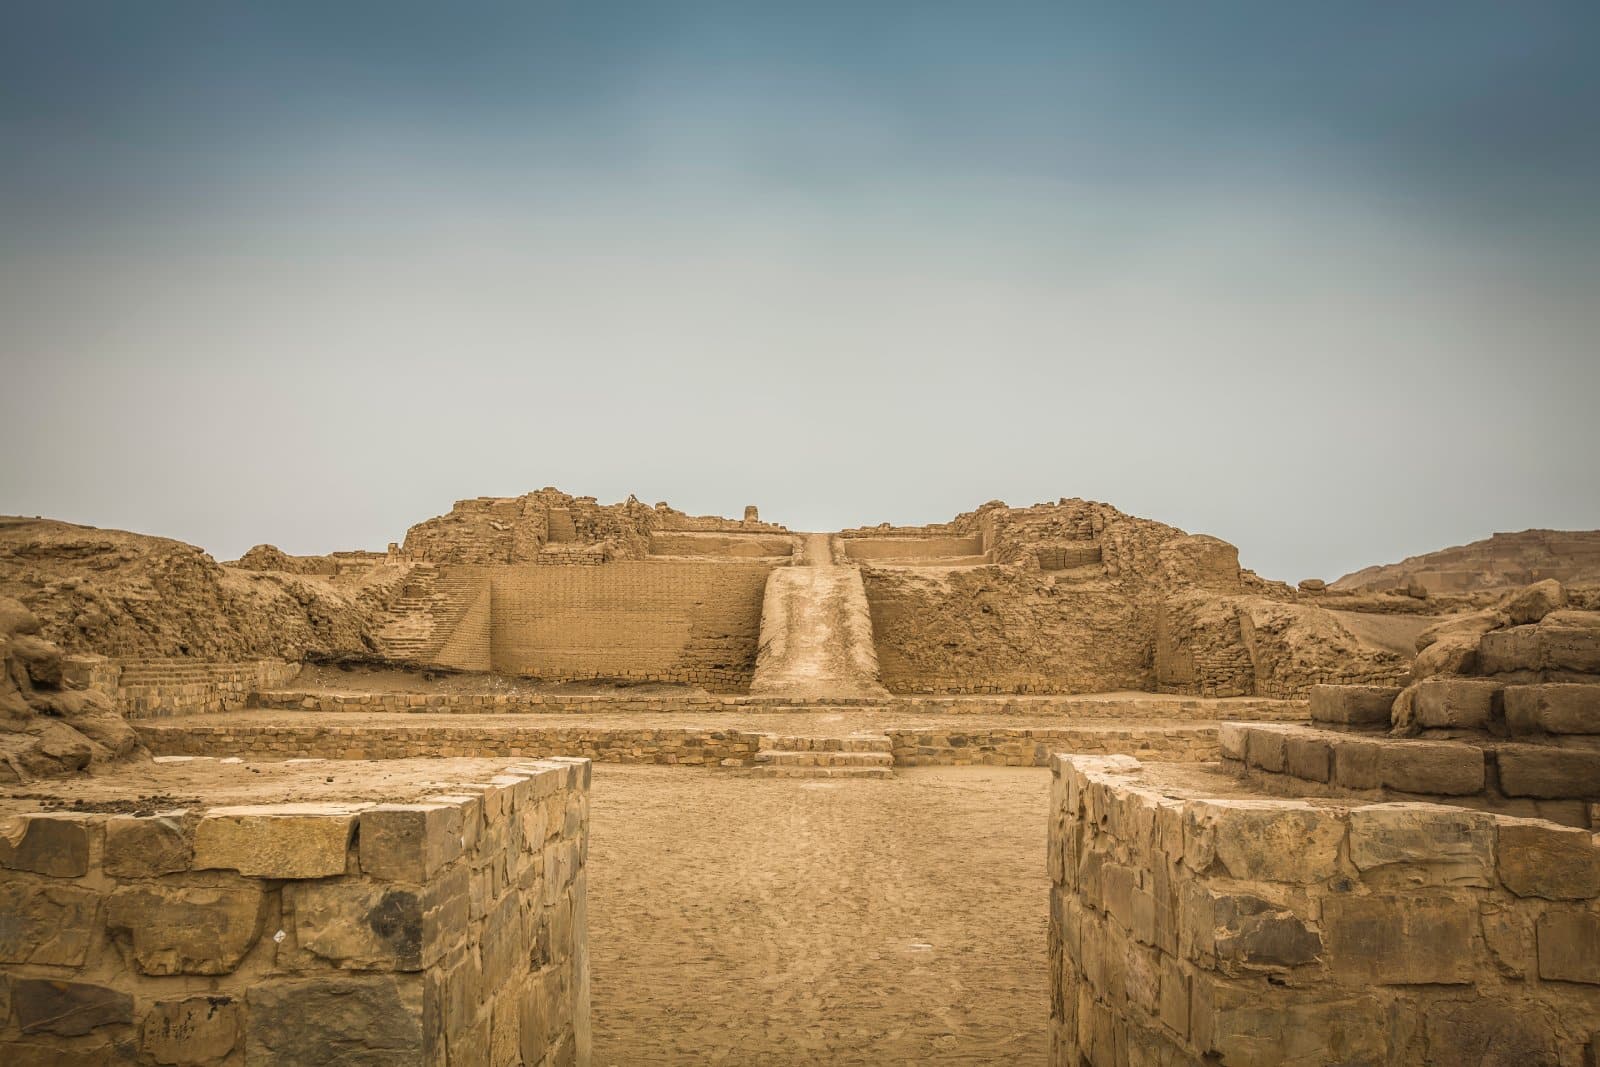 <p class="wp-caption-text">Image Credit: Shutterstock / Christian Declercq</p>  <p><span>The sacred site of Pachacamac lies just outside Lima, offering a glimpse into the religious practices of ancient Peru. This vast archaeological complex was a pilgrimage center for many Andean cultures, predating the Inca Empire.</span></p> <p><span>The site includes temples, plazas, and pyramids, with the Temple of the Sun and the Temple of Pachacamac being particularly noteworthy. An on-site museum displays artifacts recovered from the site and provides context to the significance of Pachacamac in Andean religion.</span></p>